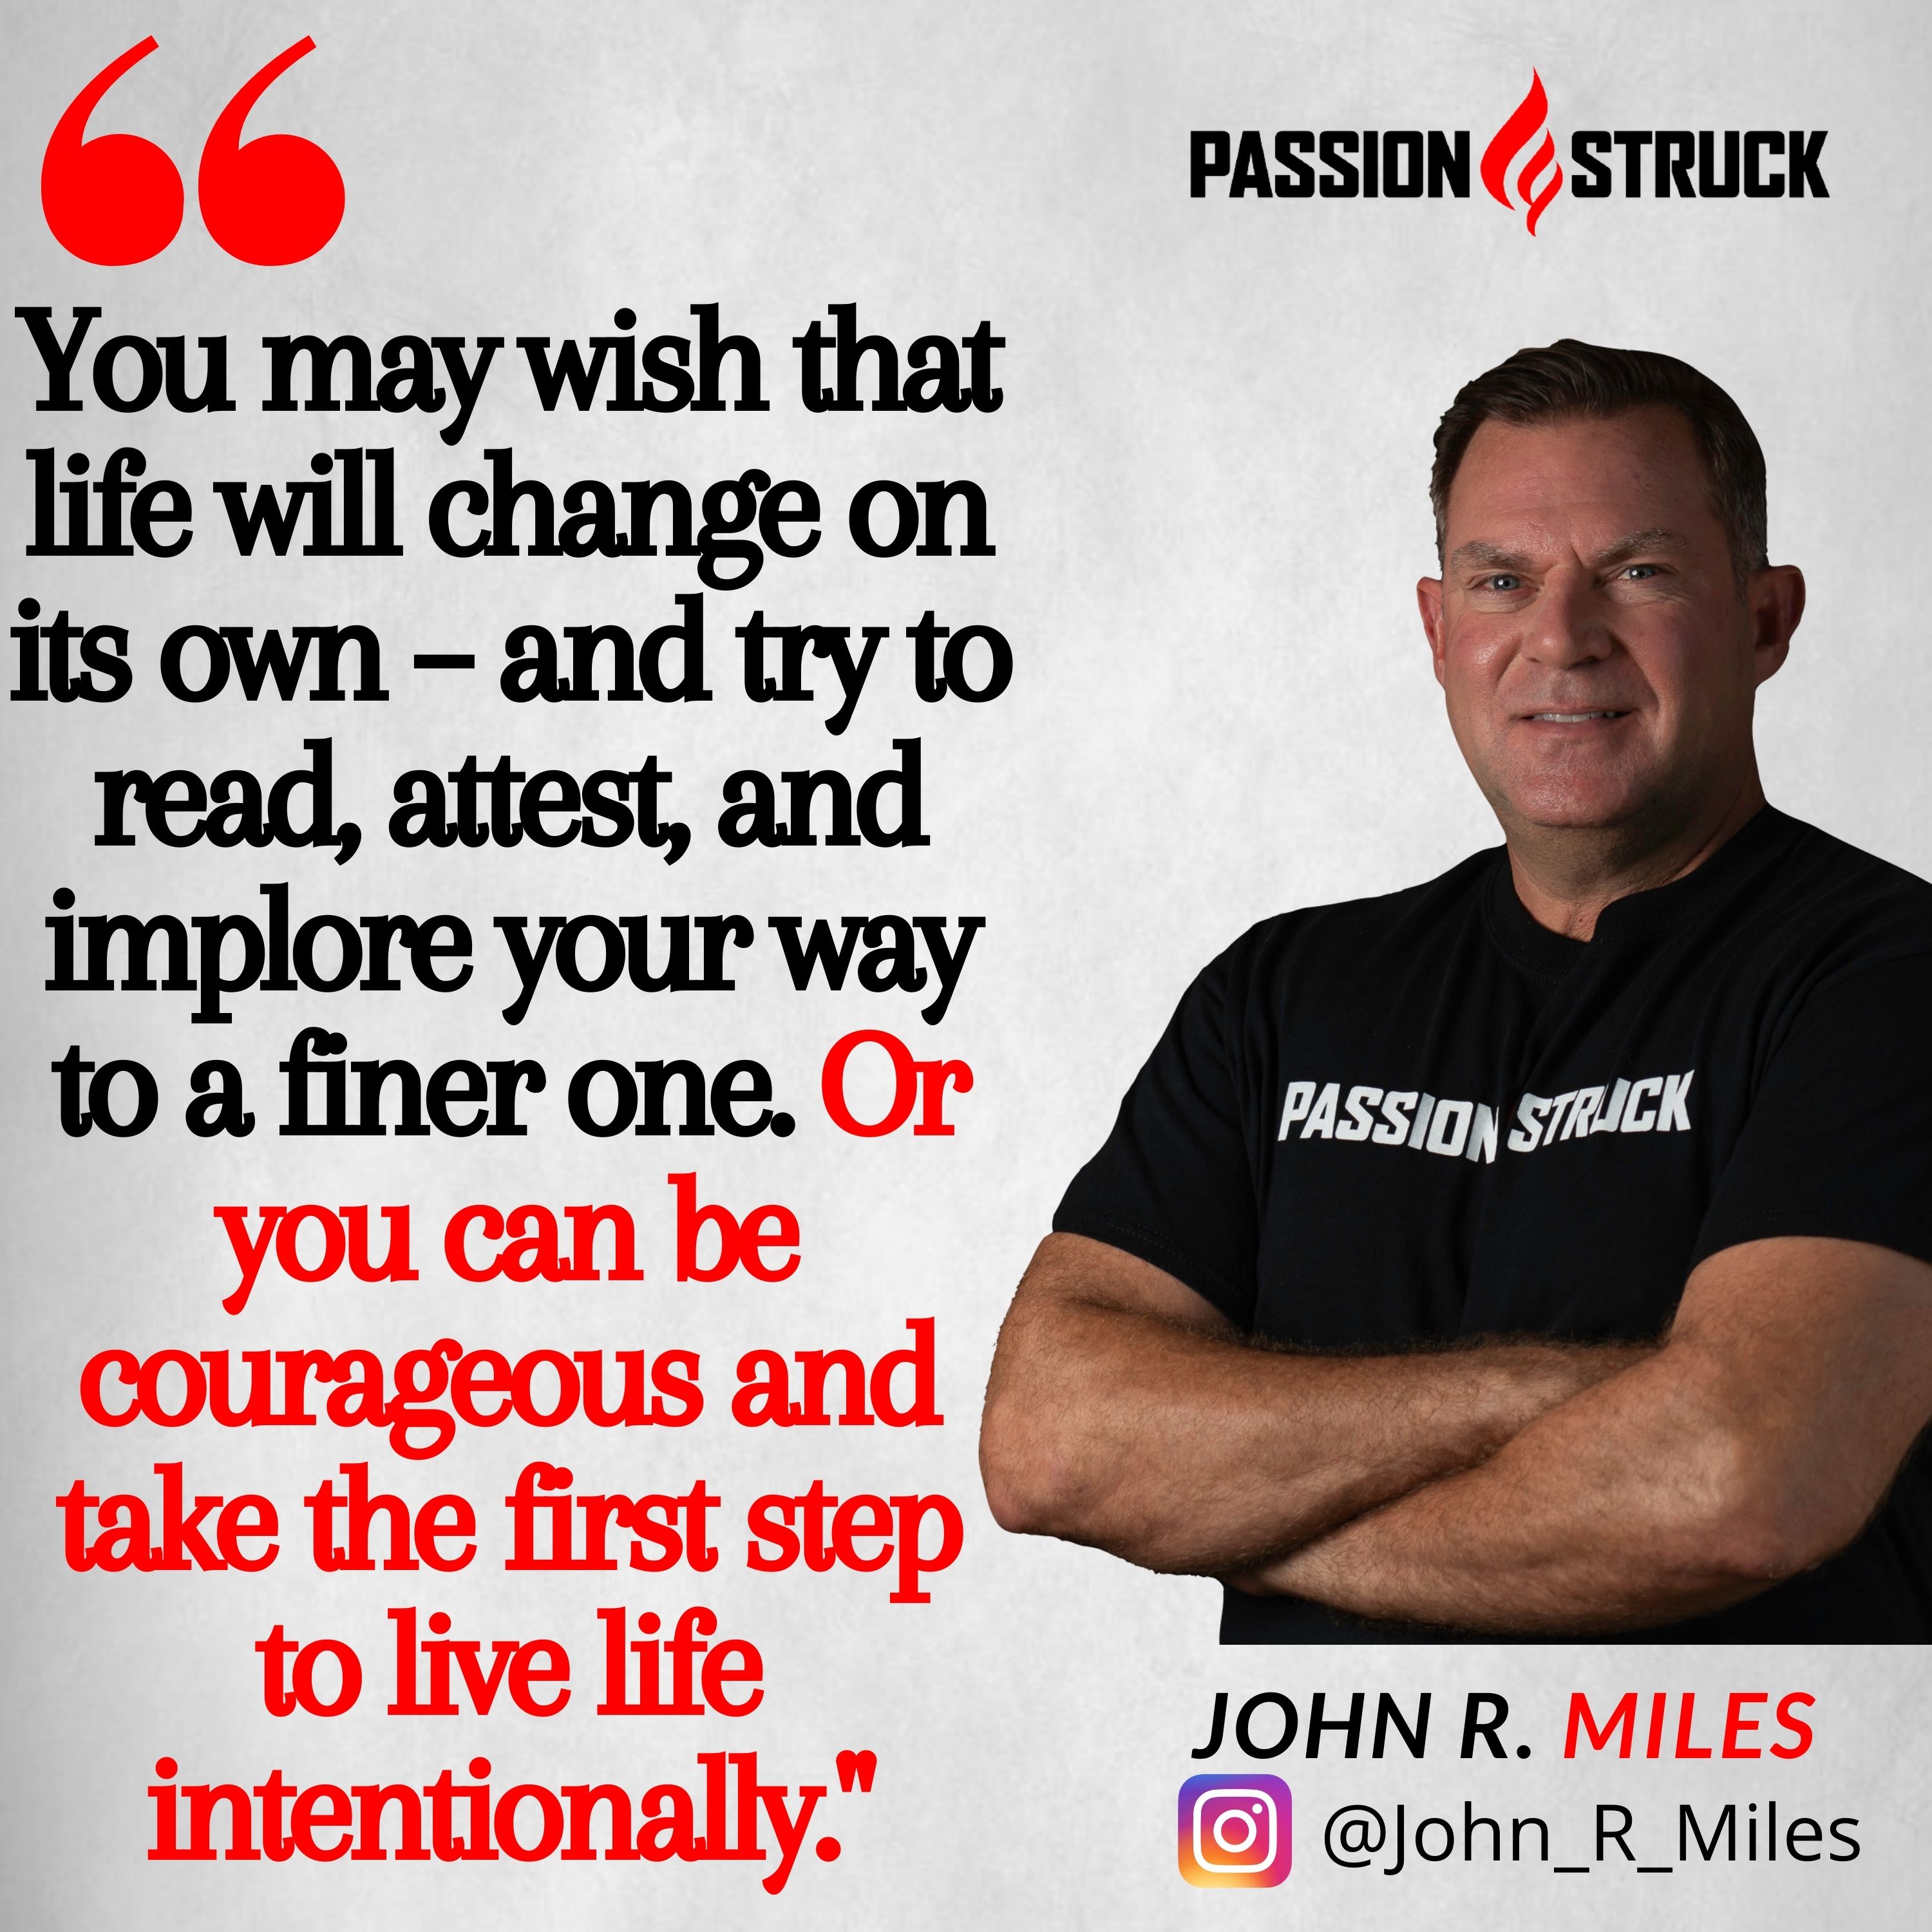 John R Miles quote on creating a rewarding life by living intentionally